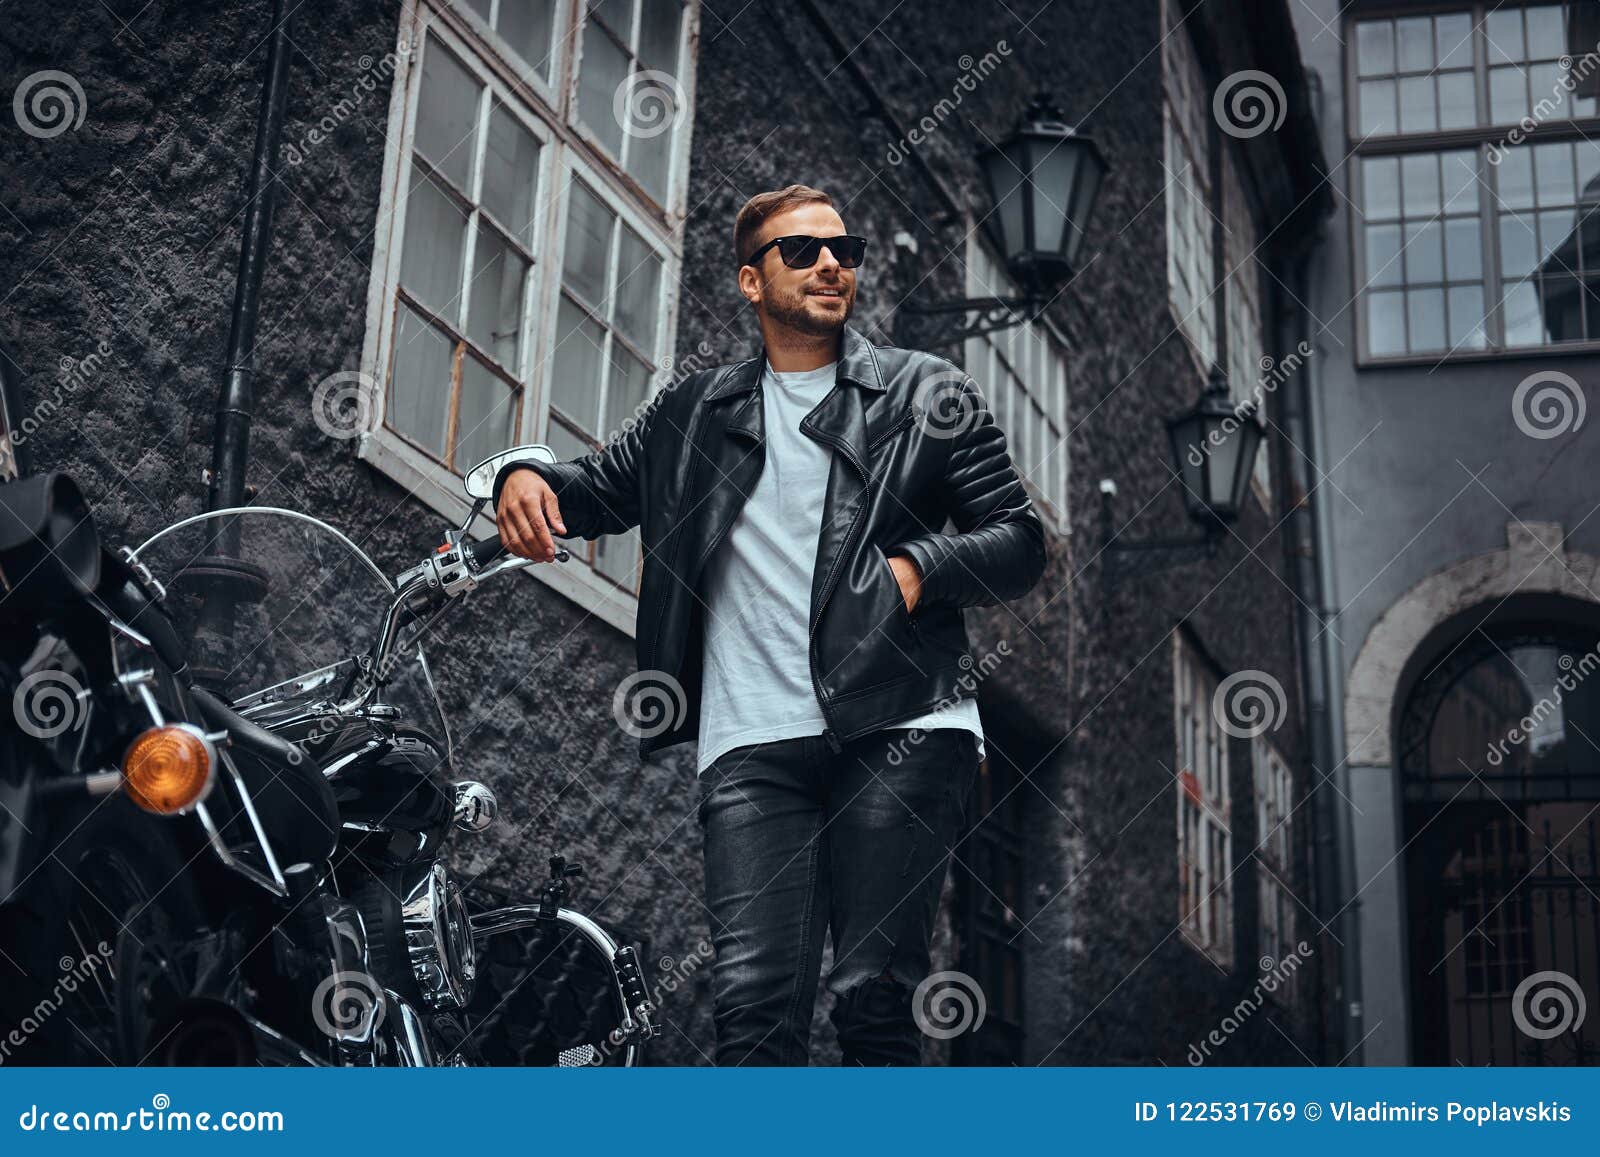 Fashionable Biker in Sunglasses Dressed in a Black Leather Jacket and ...